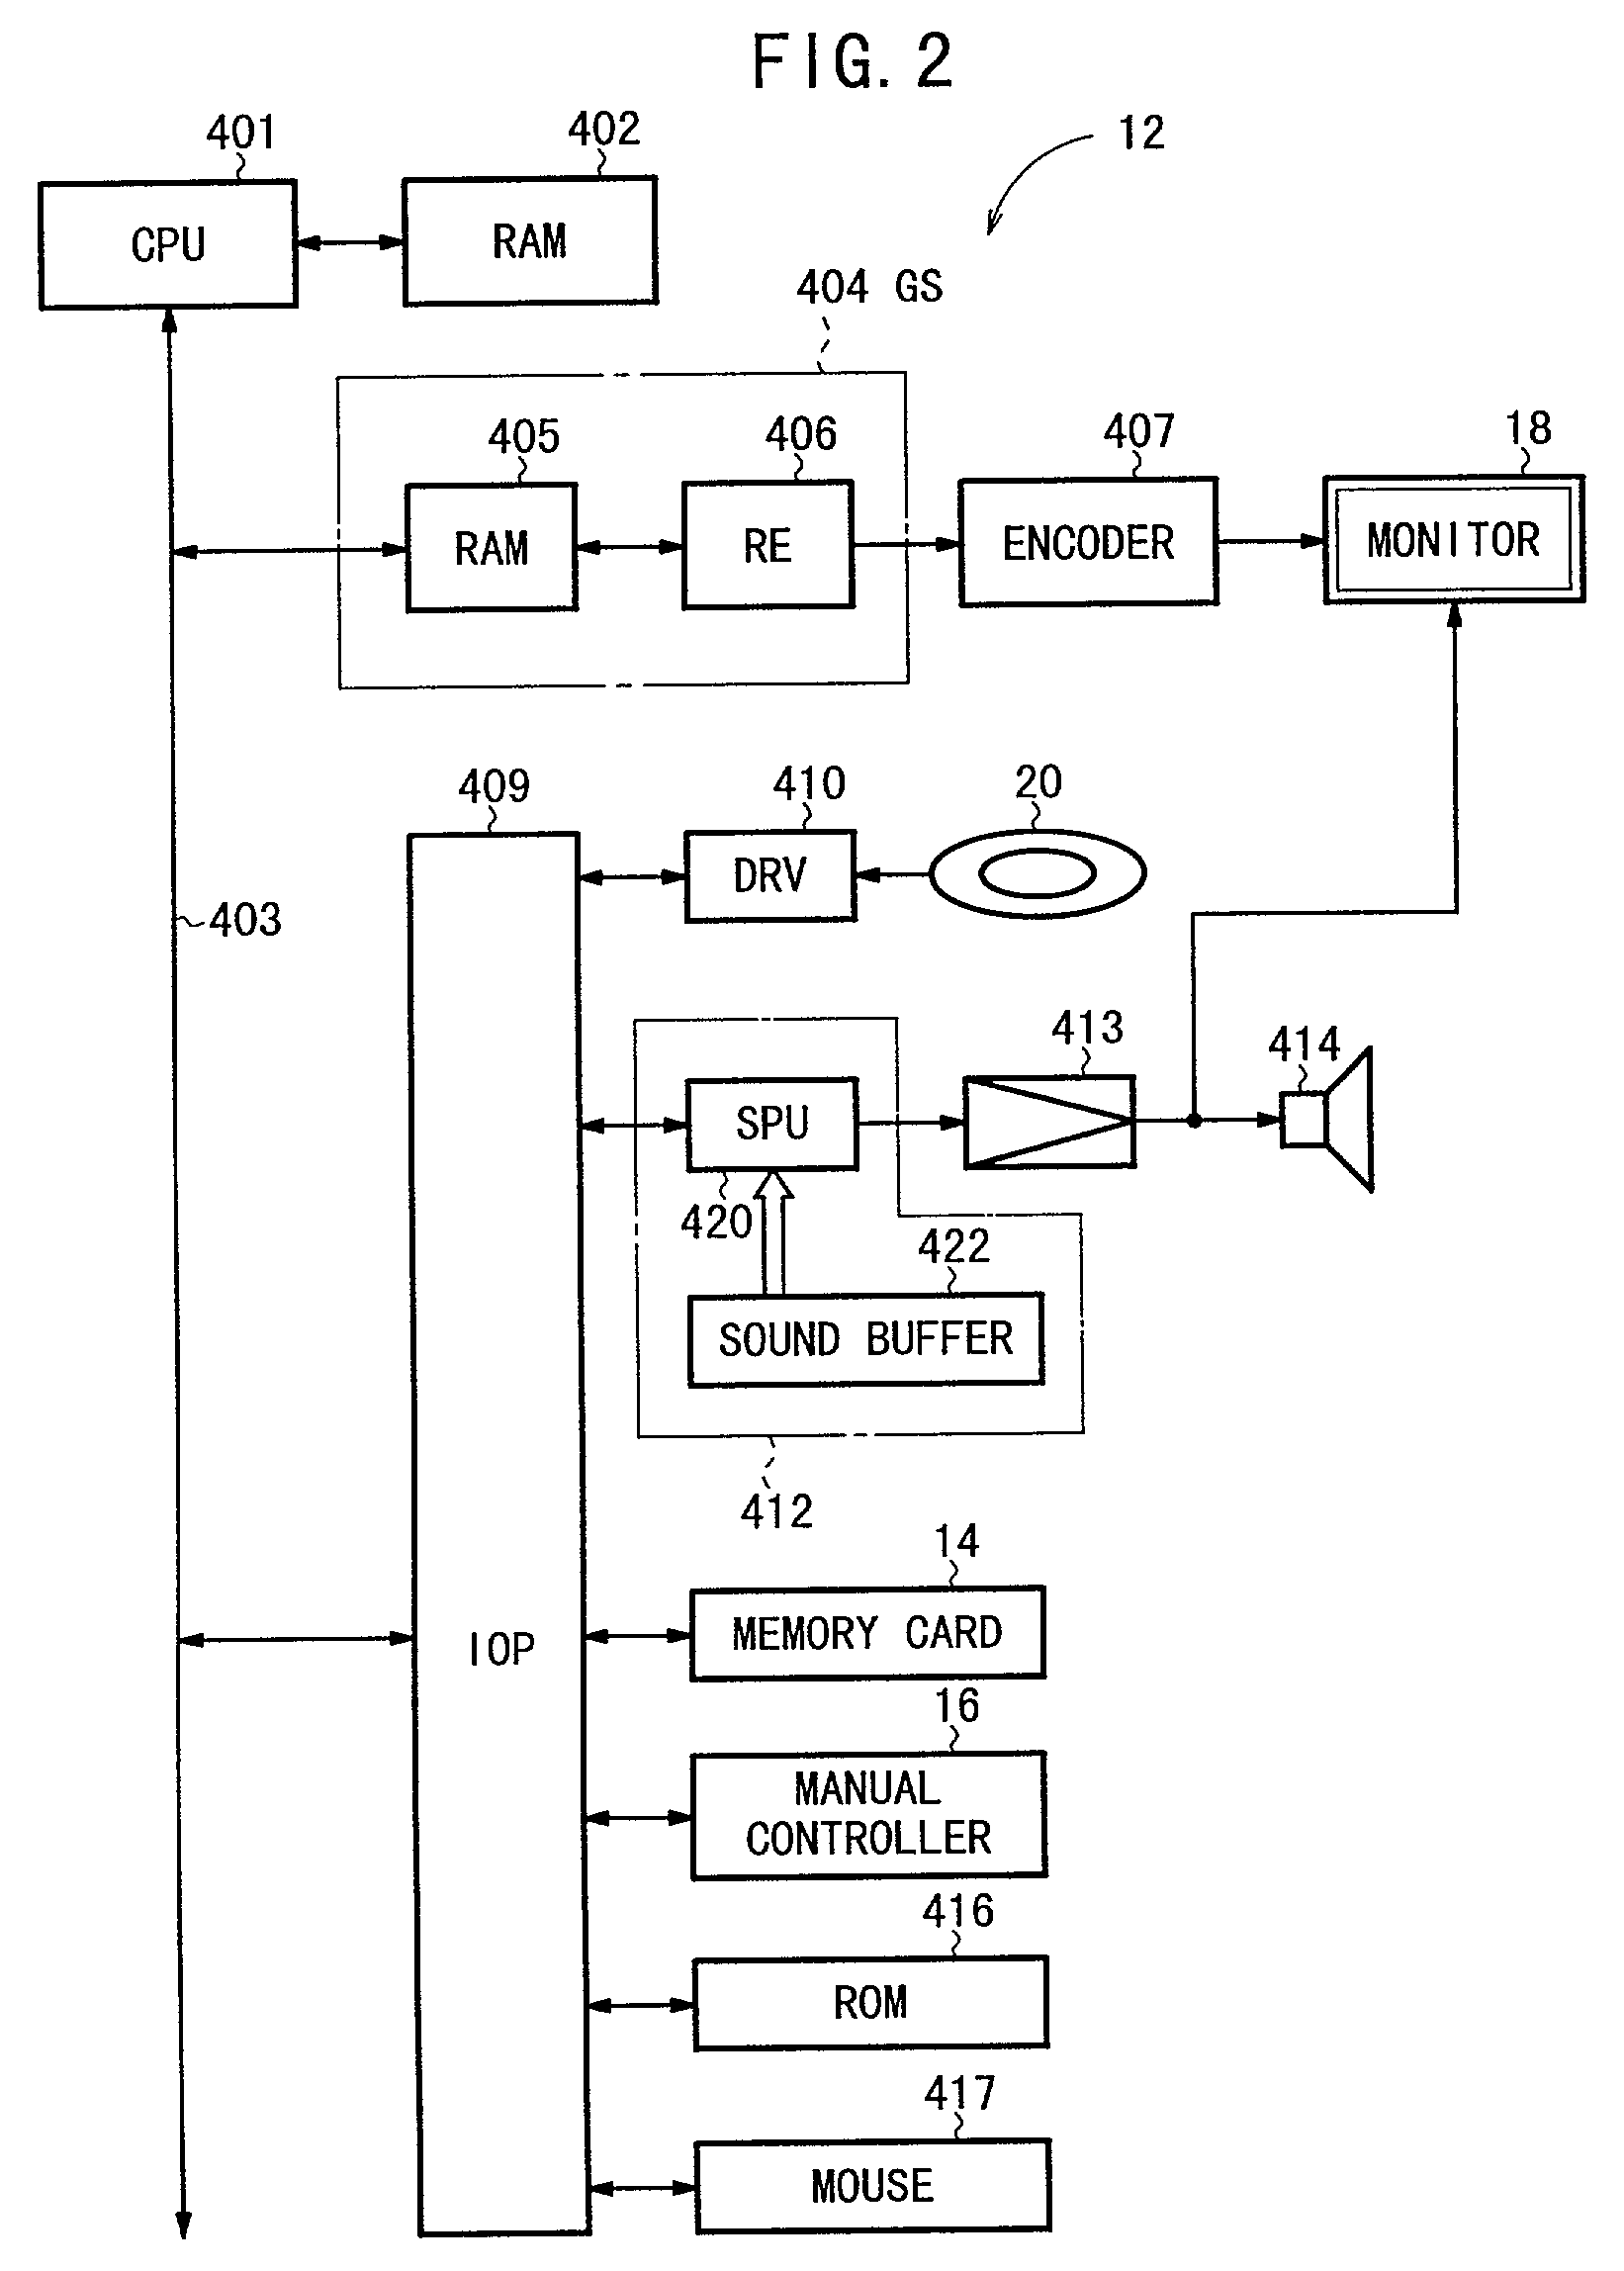 Method and system for modifying a displayed symbolic image based on the accuracy of an input geometric shape